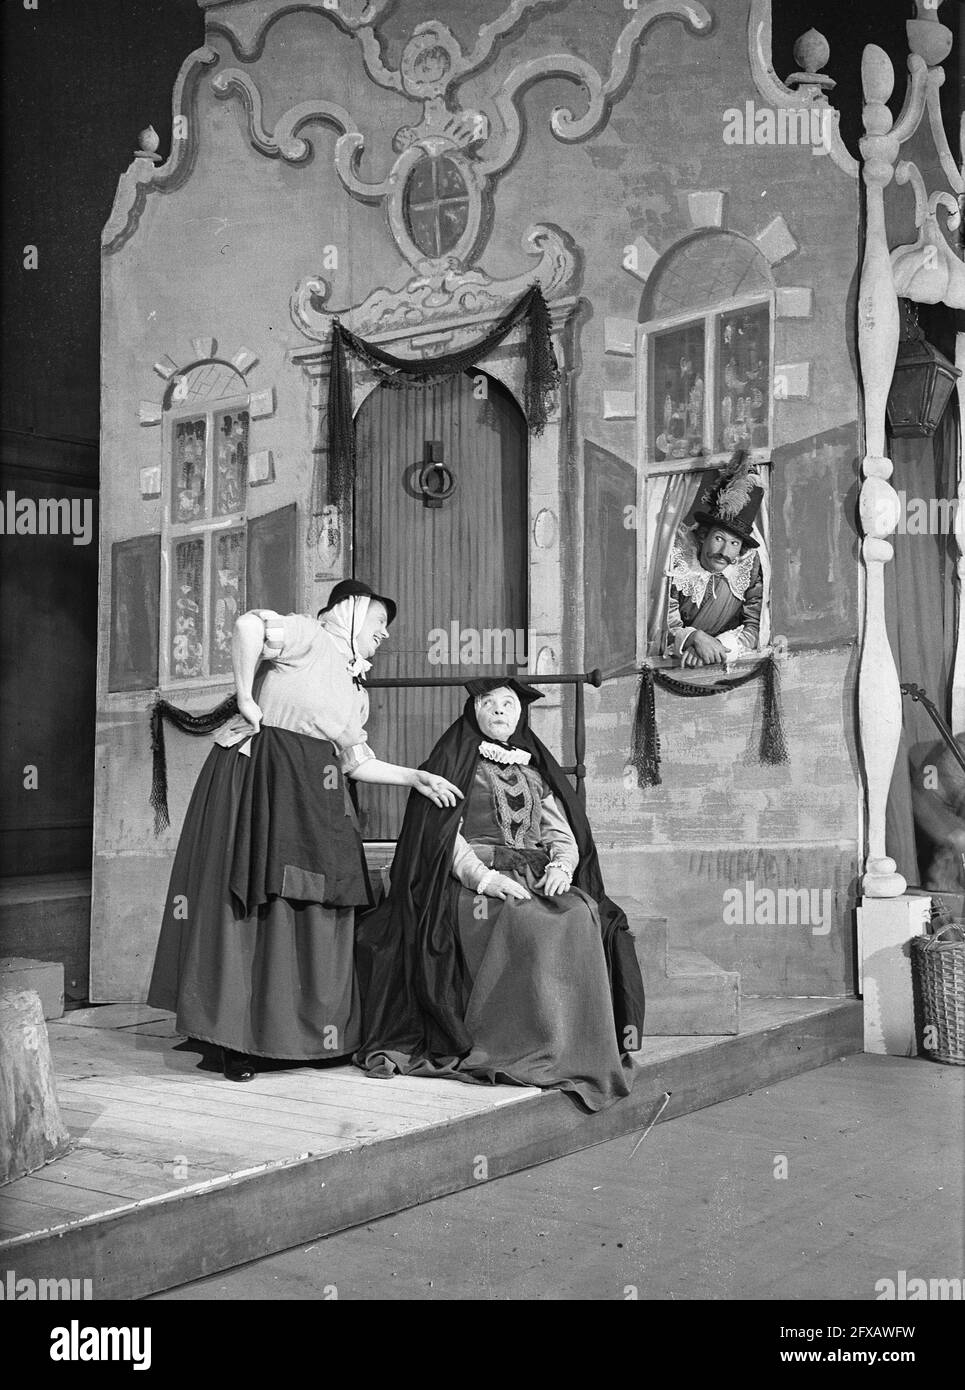 Warenar performance, May 19, 1947, theater, drama, The Netherlands, 20th century press agency photo, news to remember, documentary, historic photography 1945-1990, visual stories, human history of the Twentieth Century, capturing moments in time Stock Photo